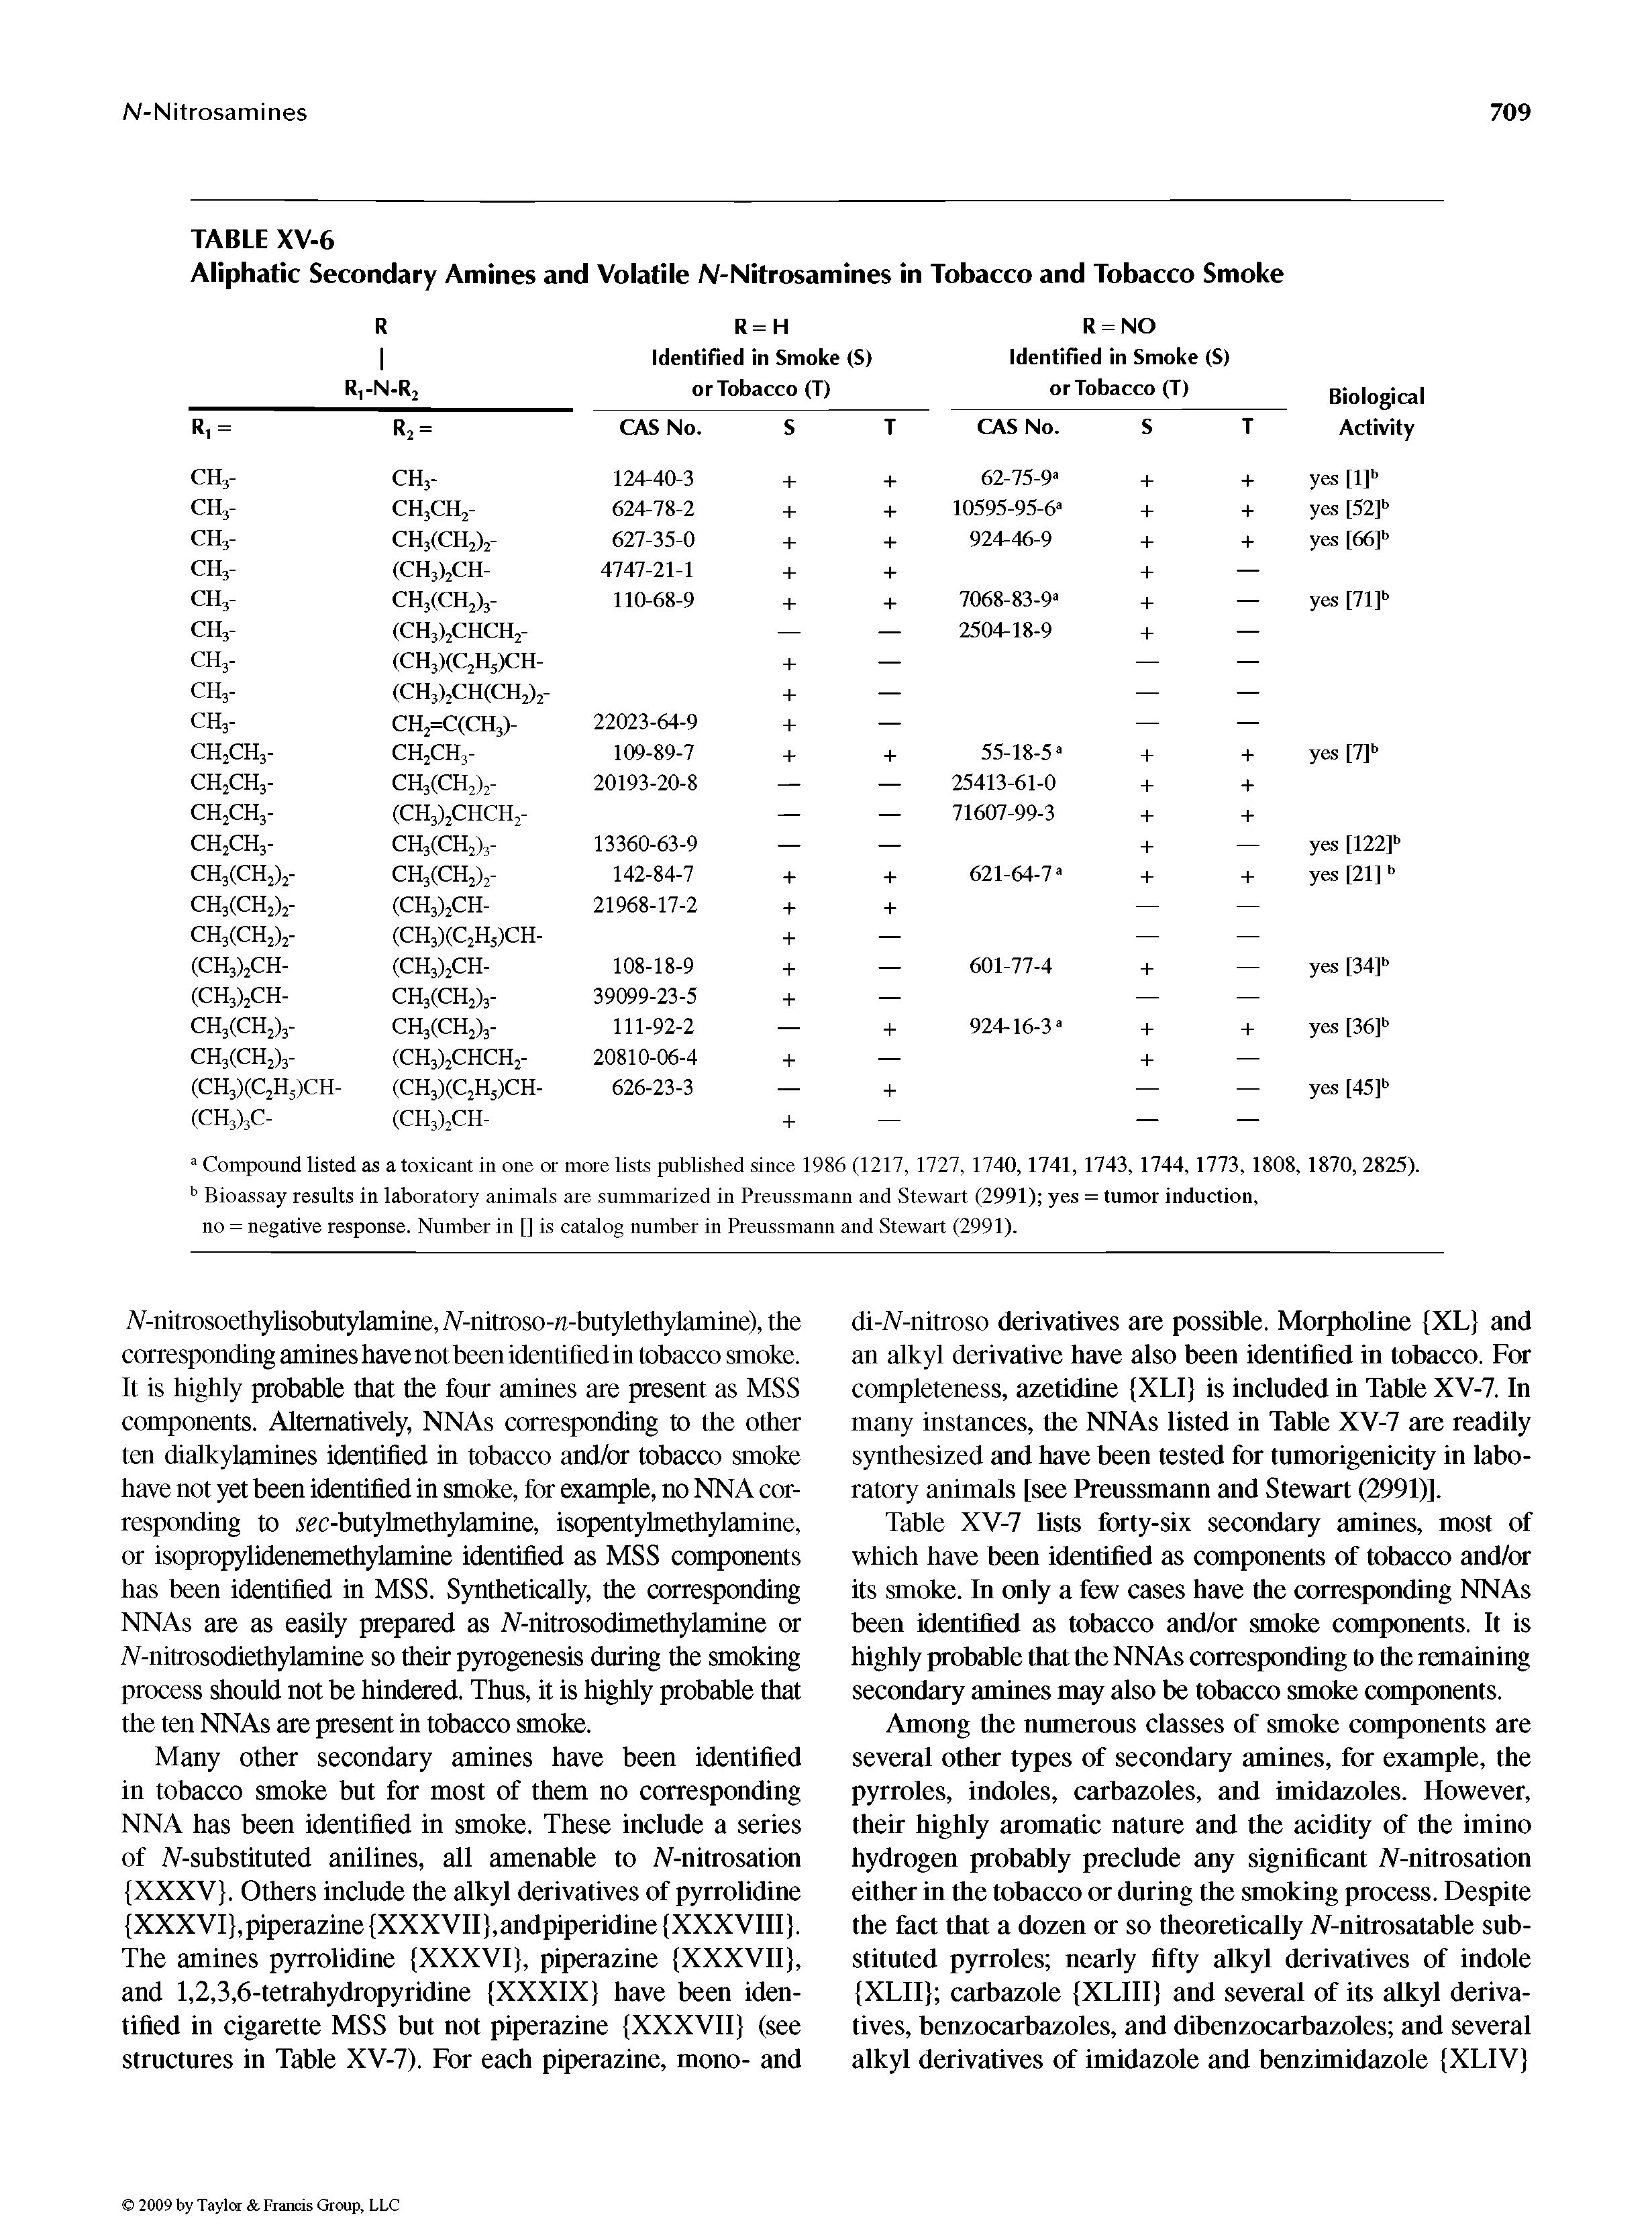 Table XV-7 lists forty-six secondary amines, most of which have been identified as components of tobacco and/or its smoke. In only a few cases have the corresponding NNAs been identified as tobacco and/or smoke components. It is highly probable that the NNAs corresponding to the remaining secondary amines may also be tobacco smoke components.